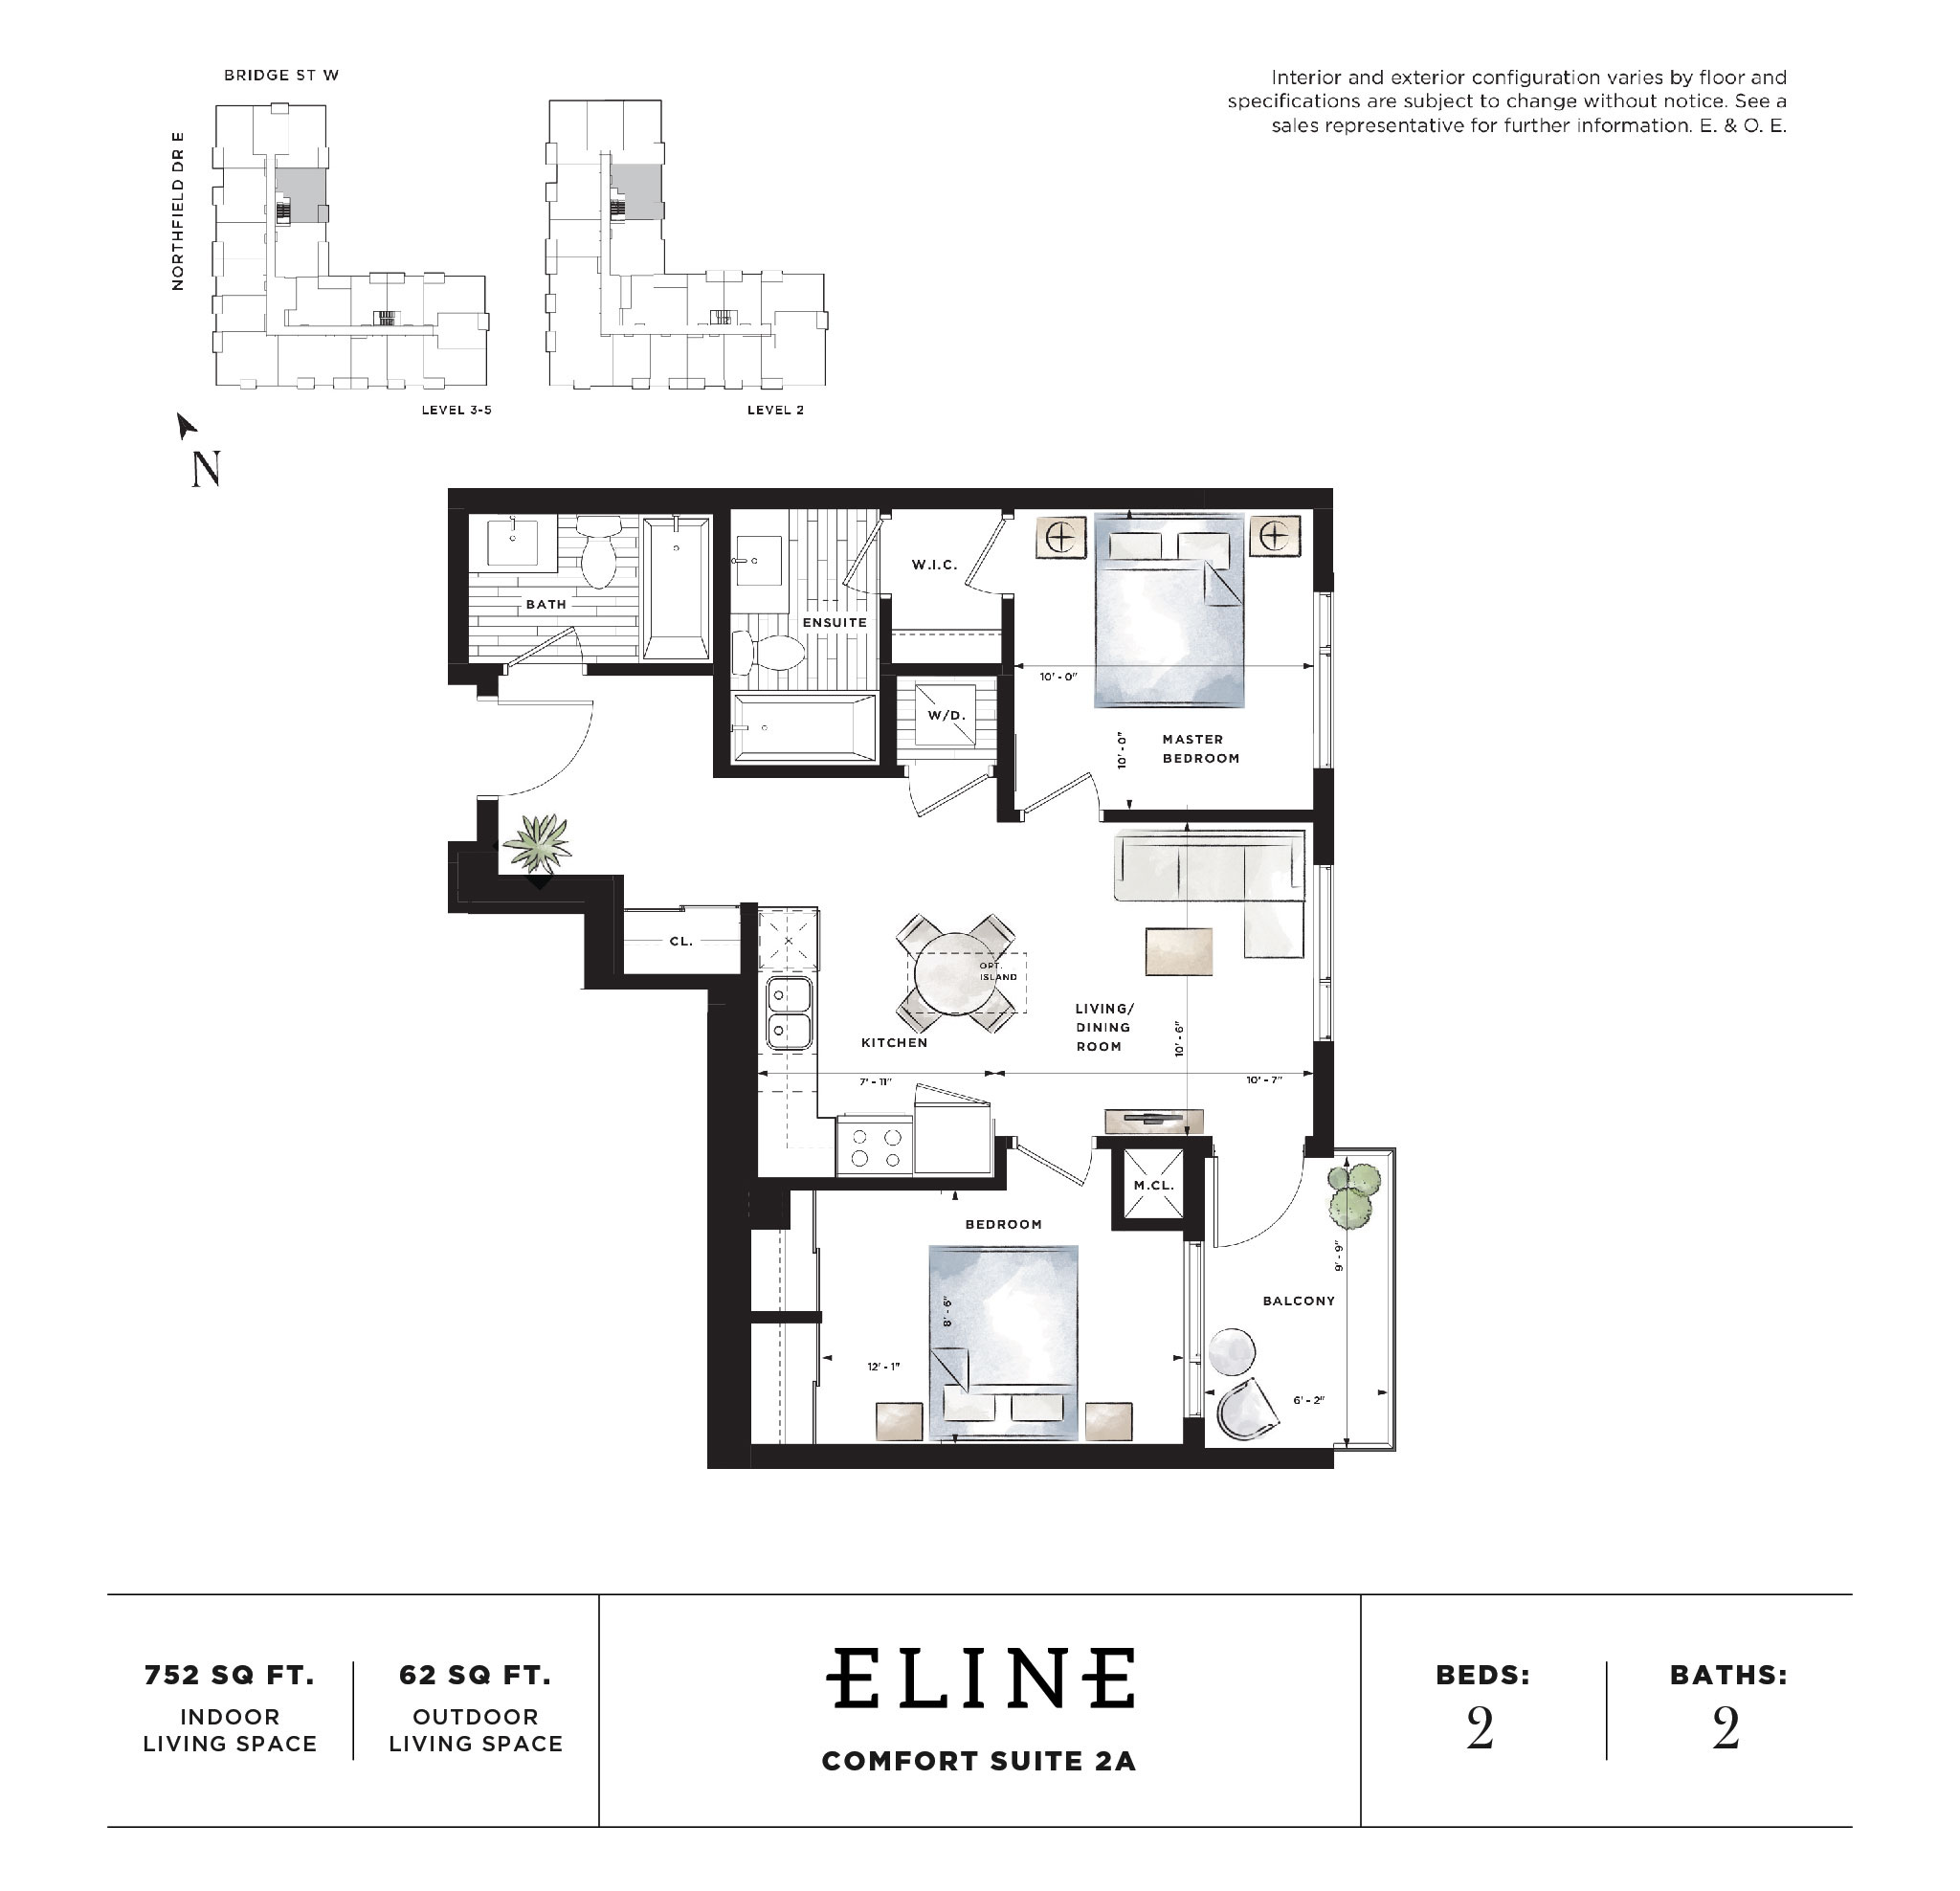  Floor Plan of Blackstone Condominiums with undefined beds